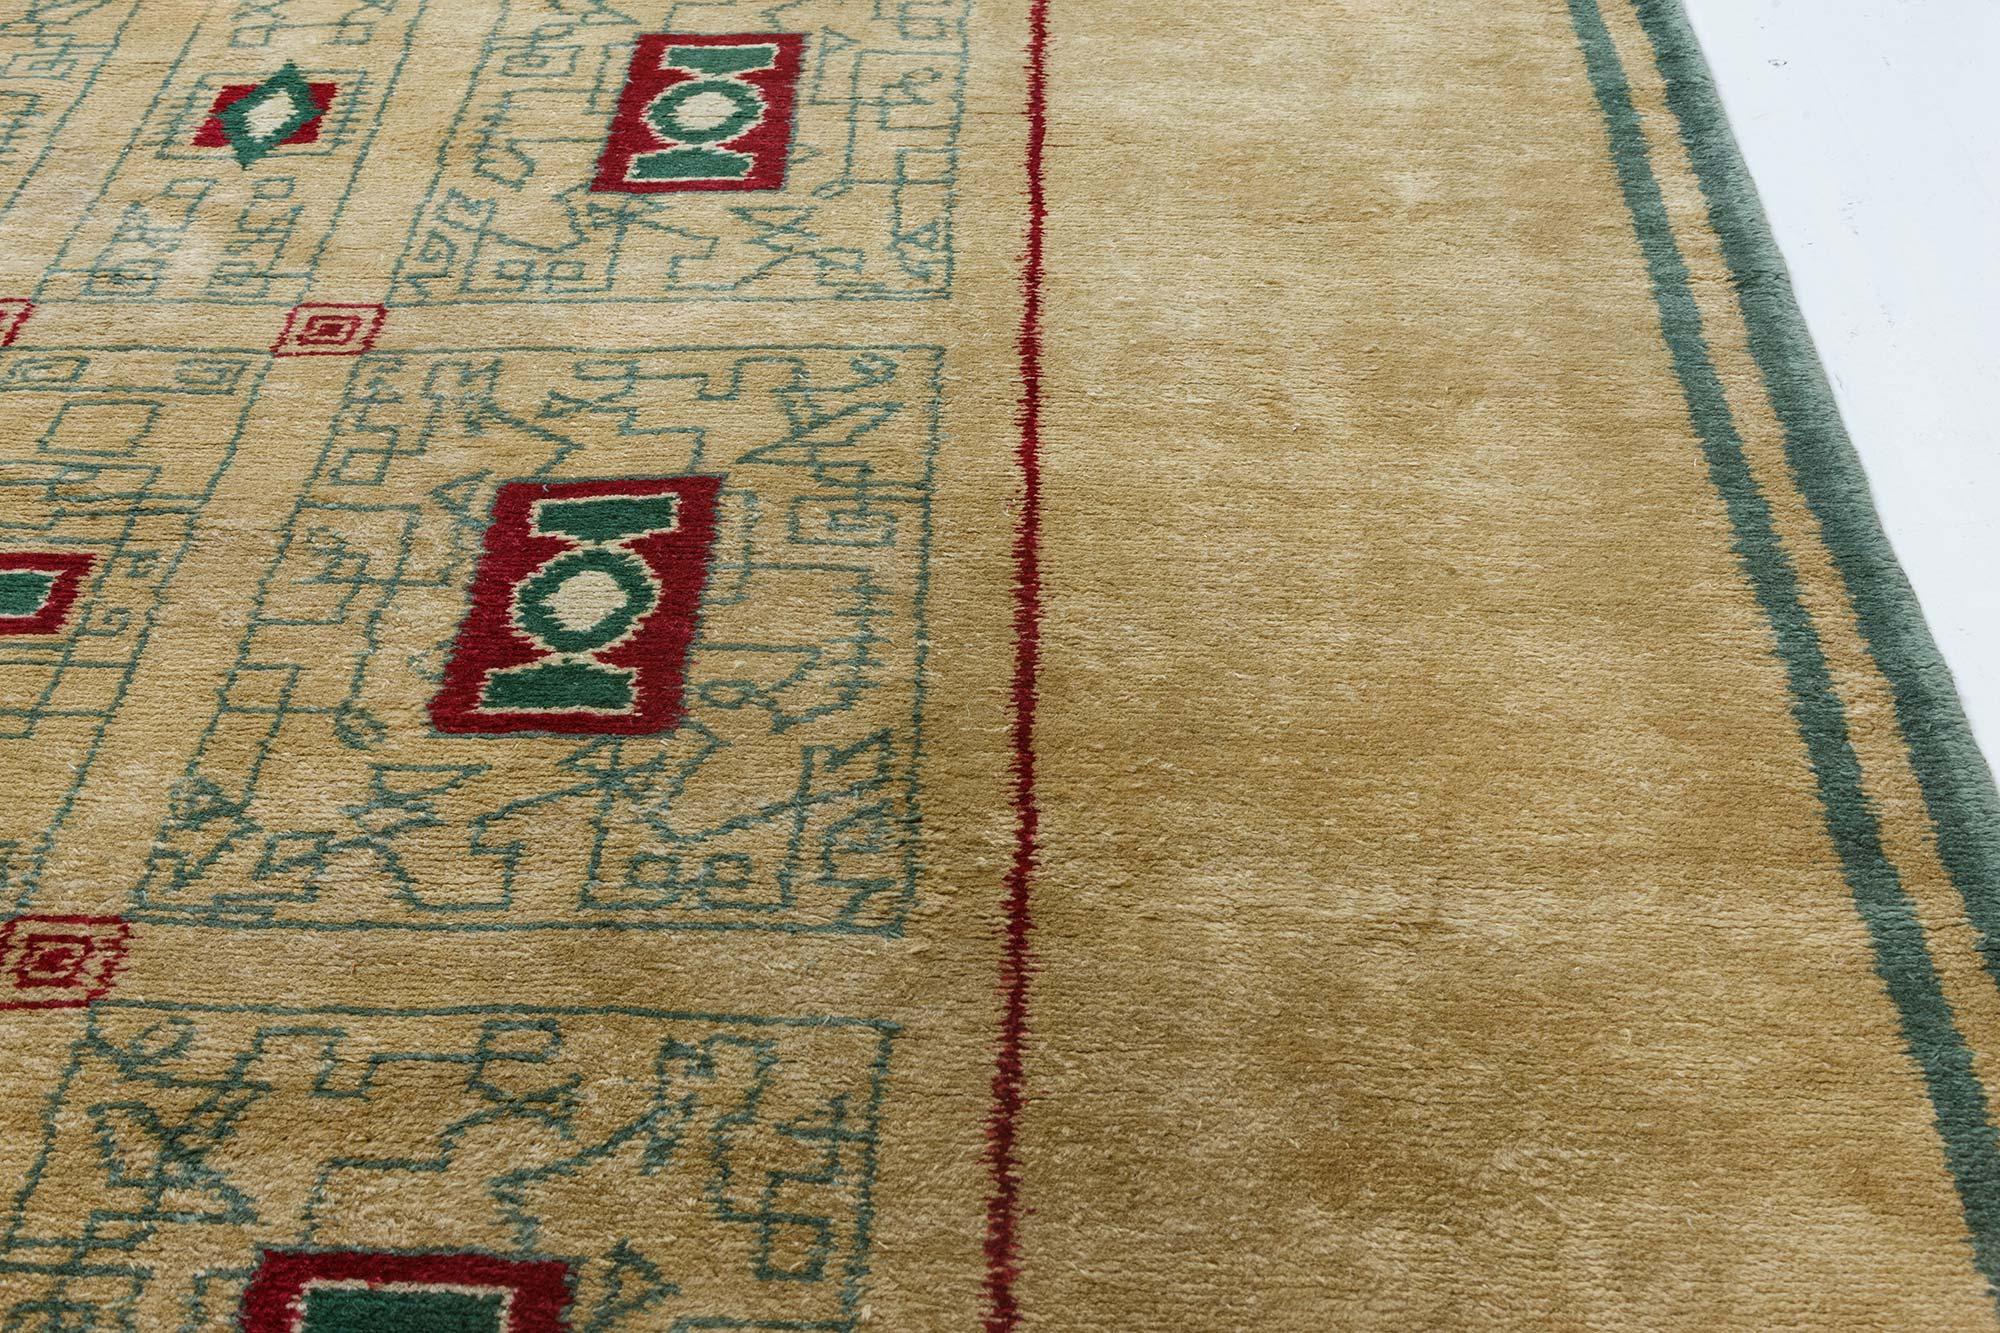 20th Century Mid-20th century French Paule Leleu Beige, Green, Burgundy Hand Knotted Wool Rug